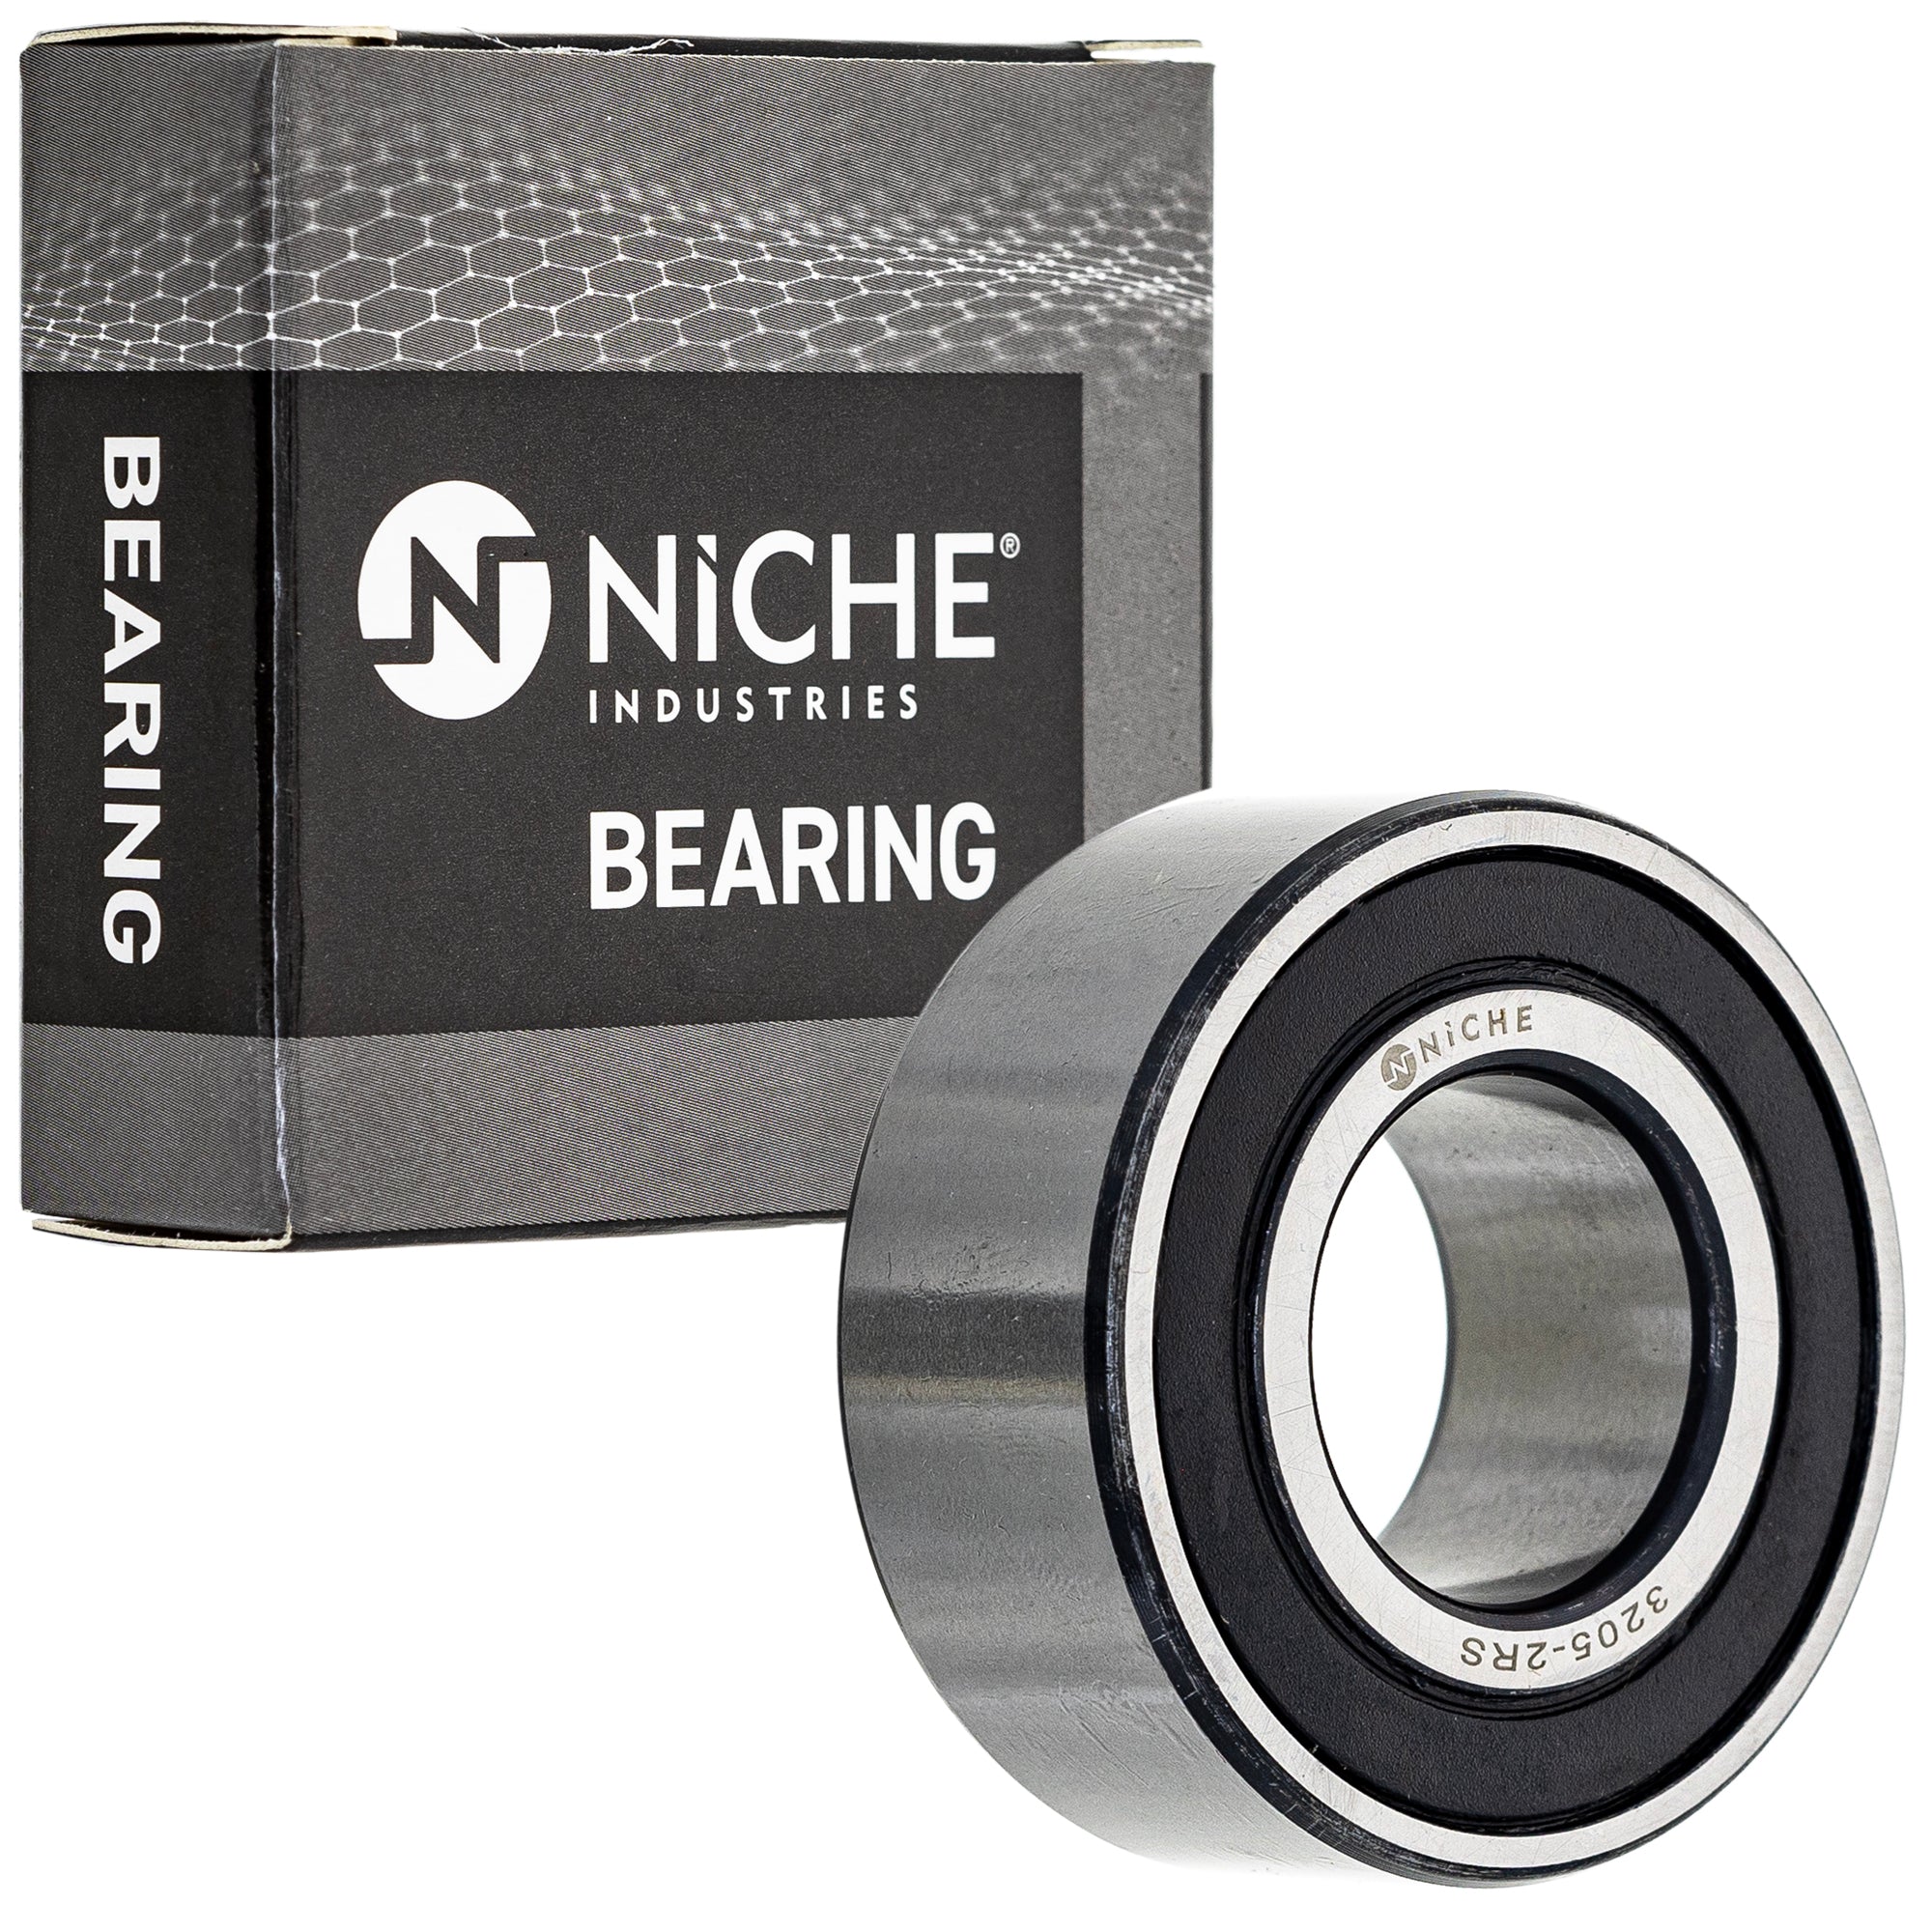 NICHE 519-CBB2284R Bearing 2-Pack for zOTHER ST1300A ST1300 Shadow